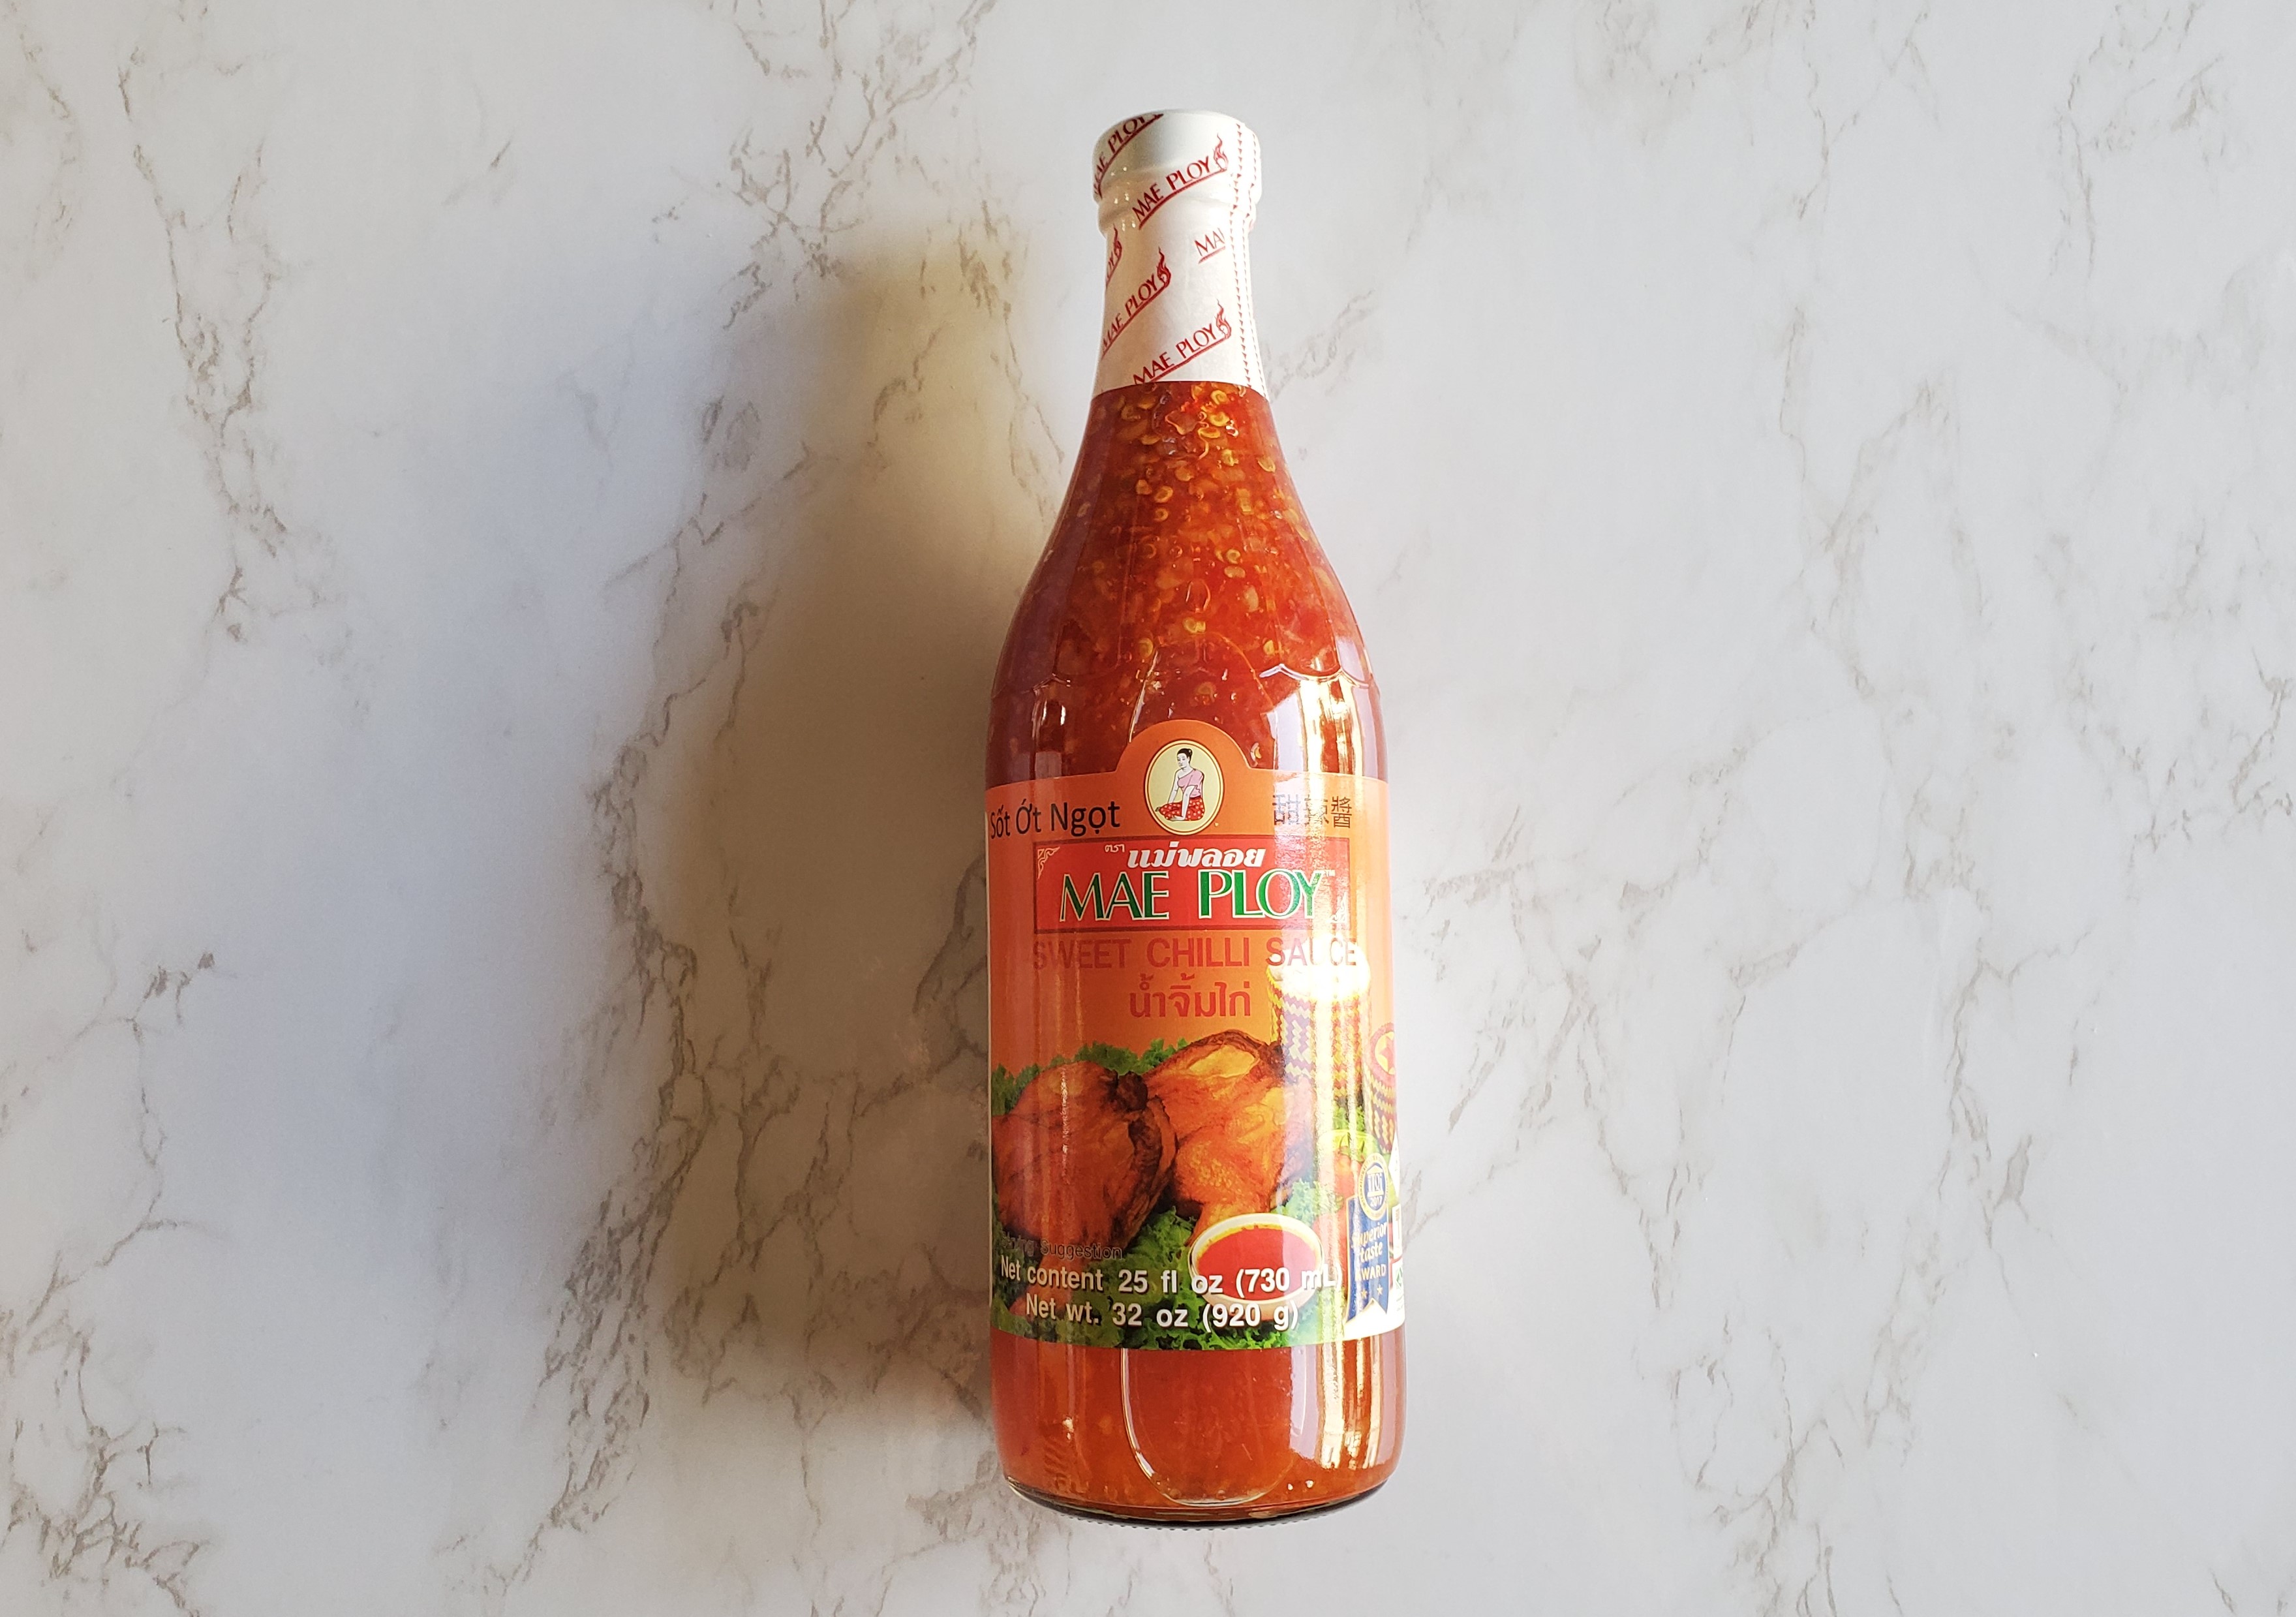 Sweet Chili Sauce on a white marble background.